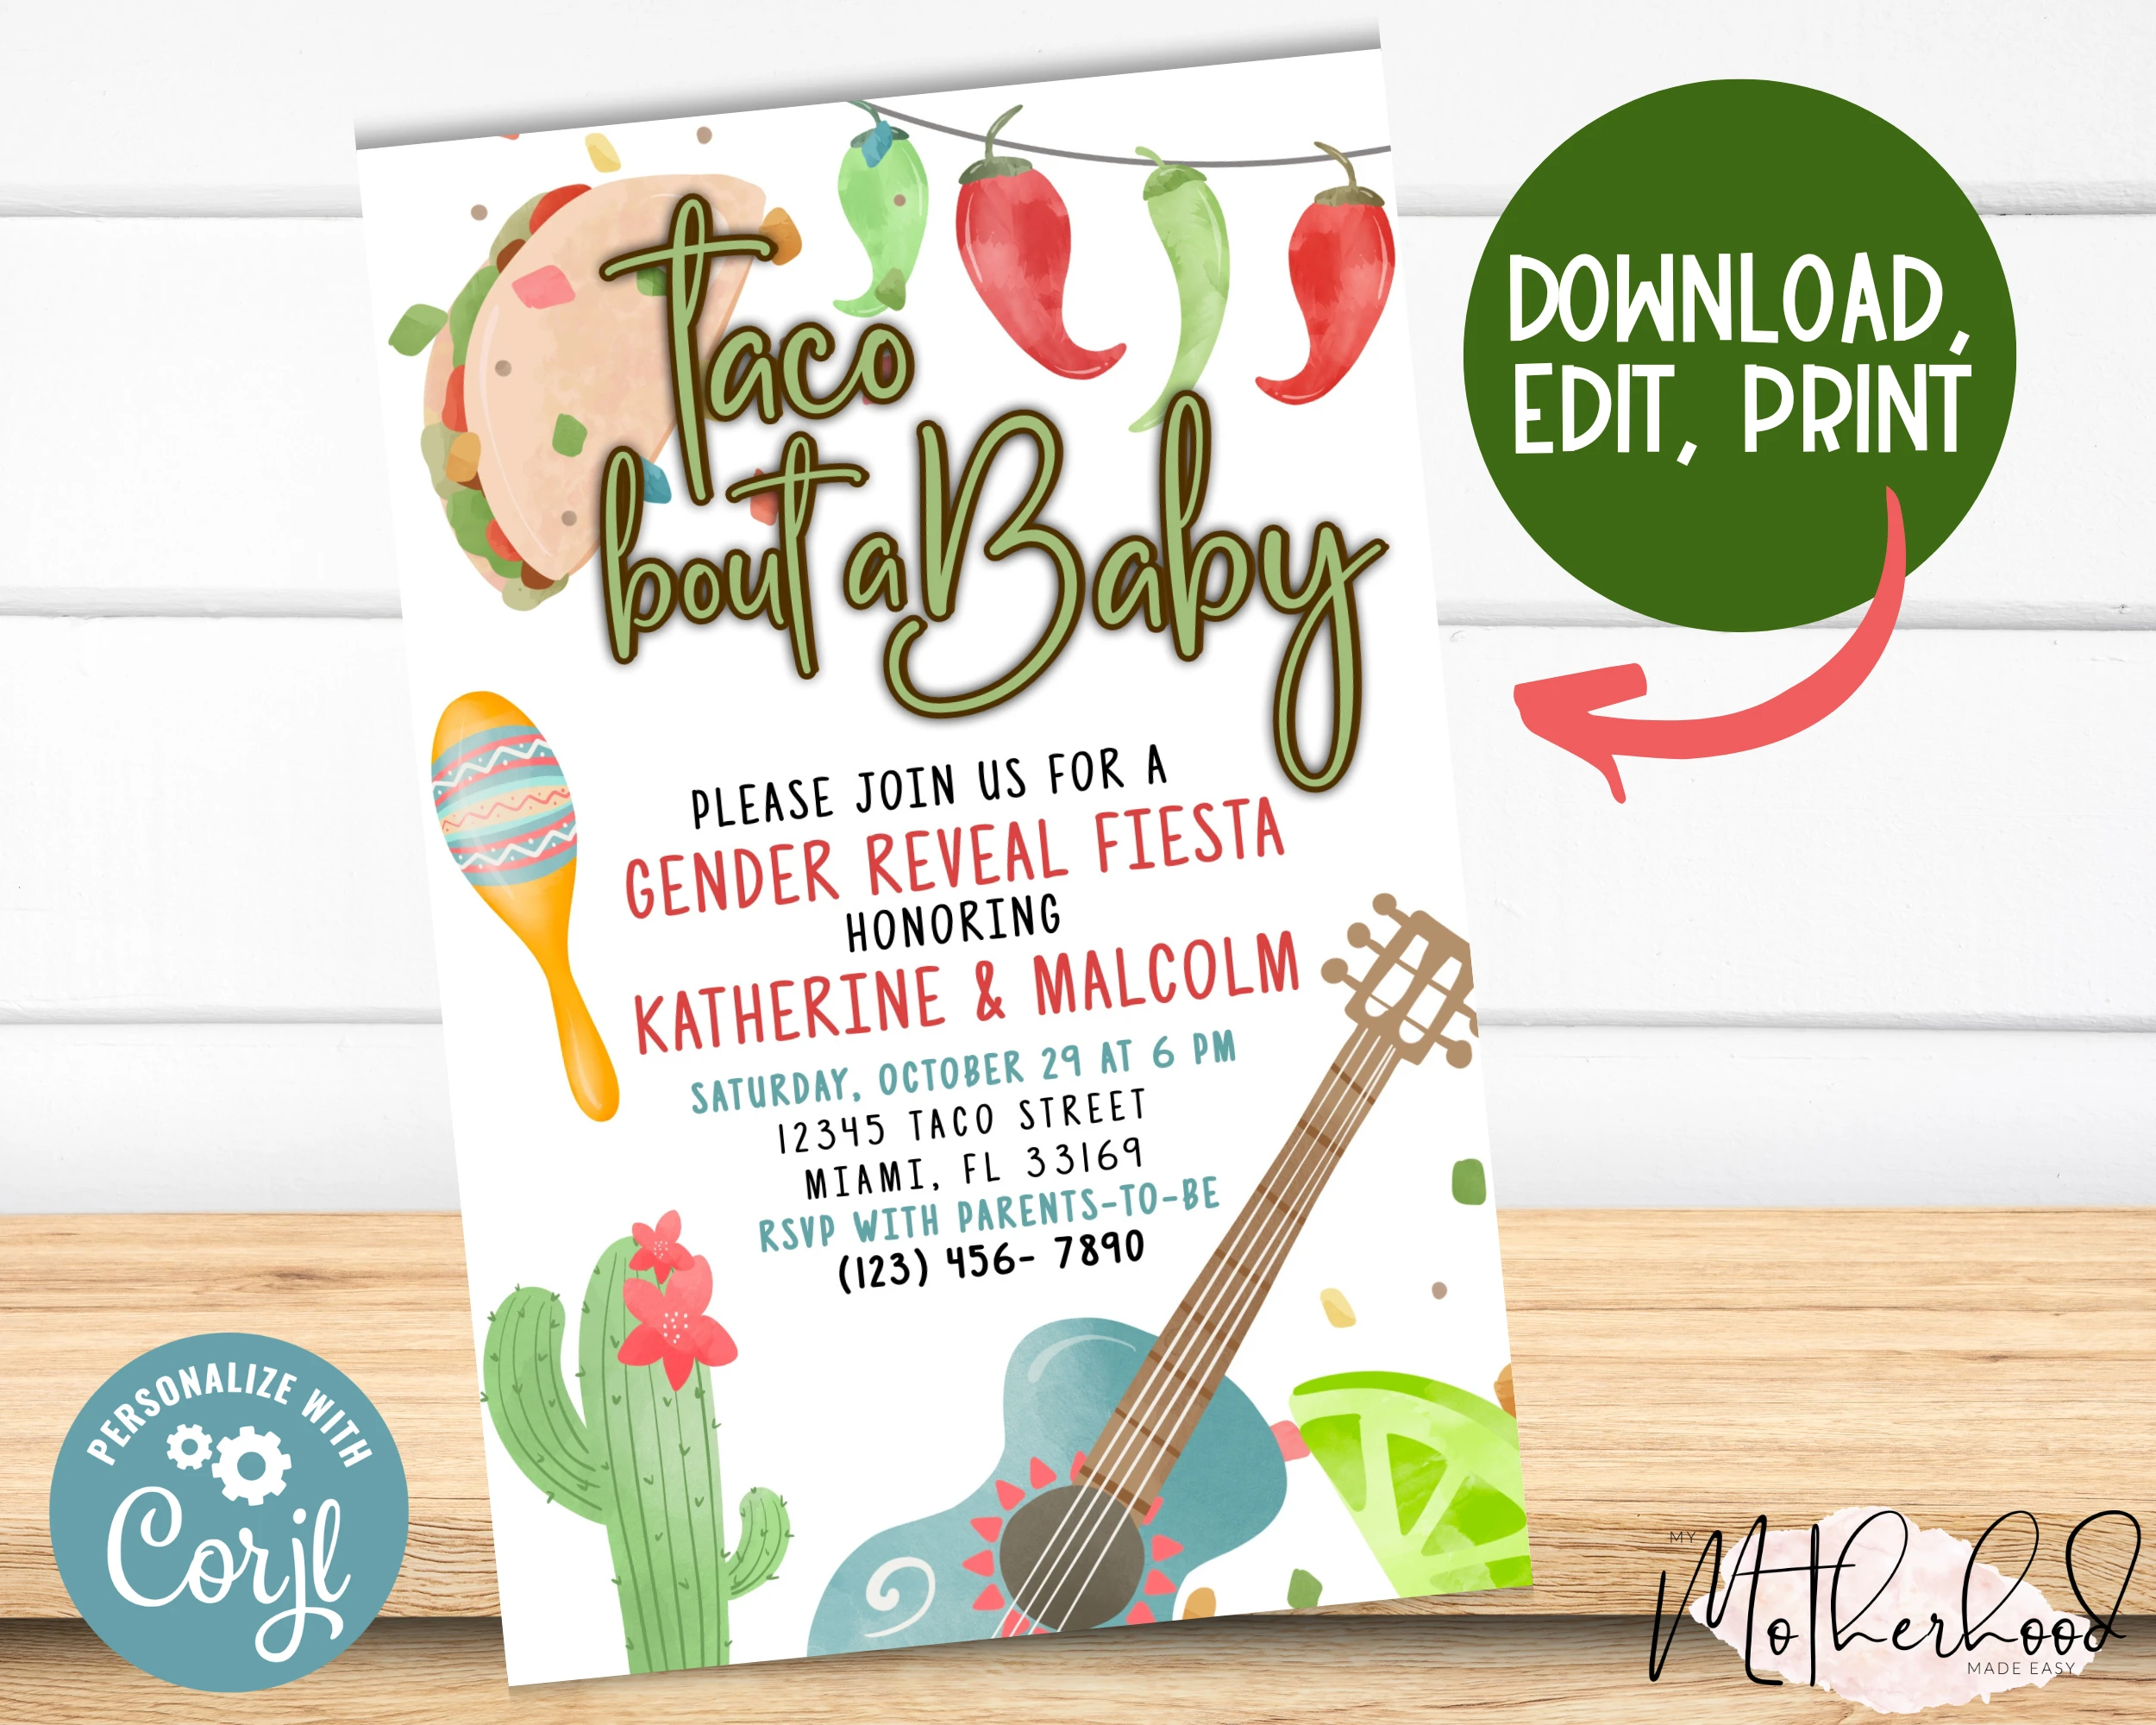 Editable Taco Bout A Baby- Gender Reveal Fiesta Party Invitation - Cinco De Mayo- Mexican - Cactus- He or She- Boy or Girl-Baby Printable  Introducing the Editable Taco Bout A Baby Gender Reveal Gender Reveal Party Invitation Card! This beautiful and personalizable Gender Reveal Party Invitation is the perfect way to invite your amazing friends and family to your gender reveal fiesta. With a variety of colors and fonts to choose from, you can easily customize this party announcement to perfectly reflect your style. Whether you're sharing on social media or sending out physical party invitations, this stunning Gender Reveal Party Invitation is sure to get everyone excited for your baby reveal.